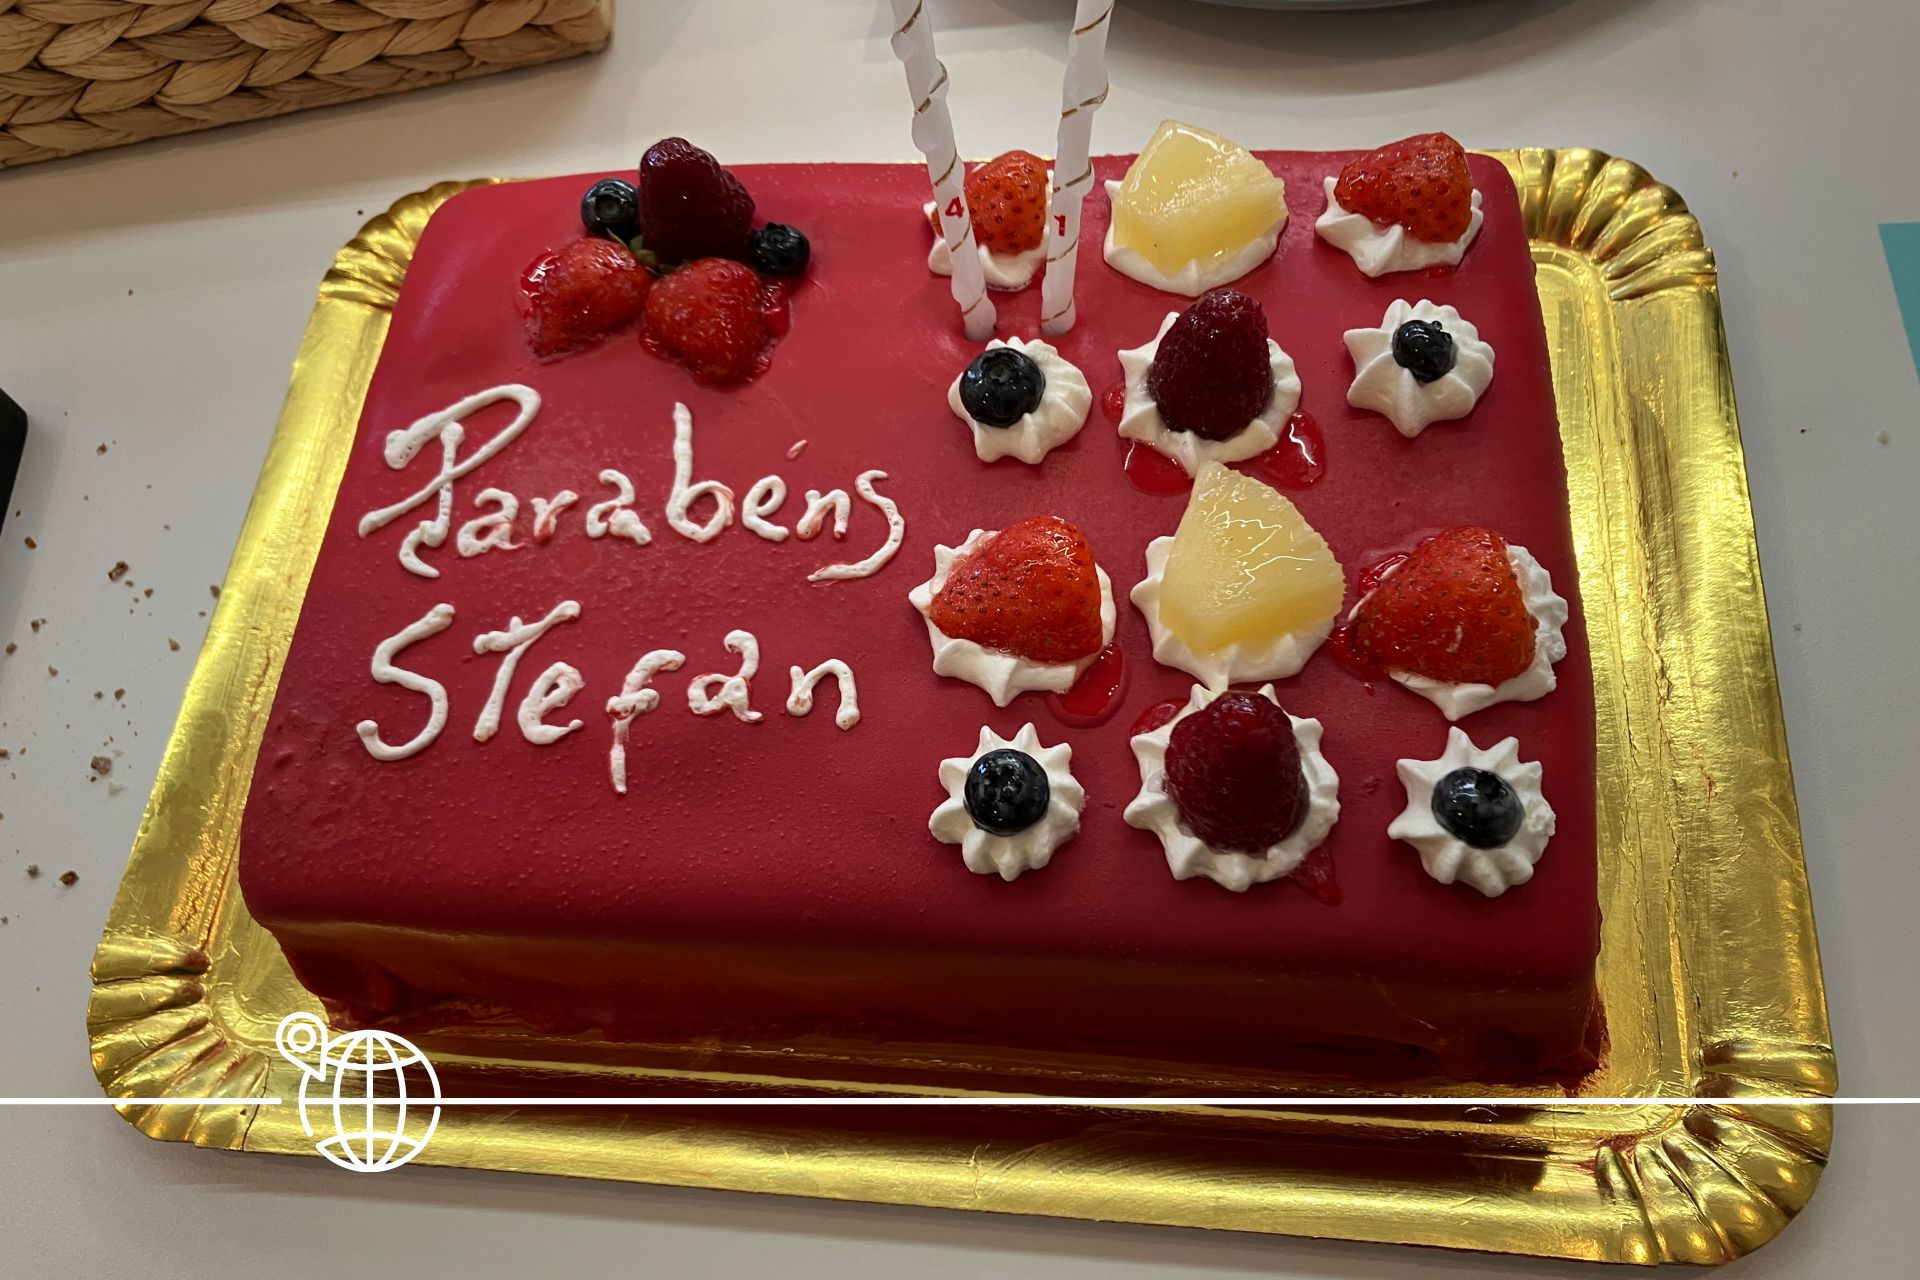 Sweet delicacy: Our People Support Team surprised me with this cake on my birthday. The colleagues help every newcomer get started in the Hub and make sure that the onboarding in Lisbon runs smoothly.